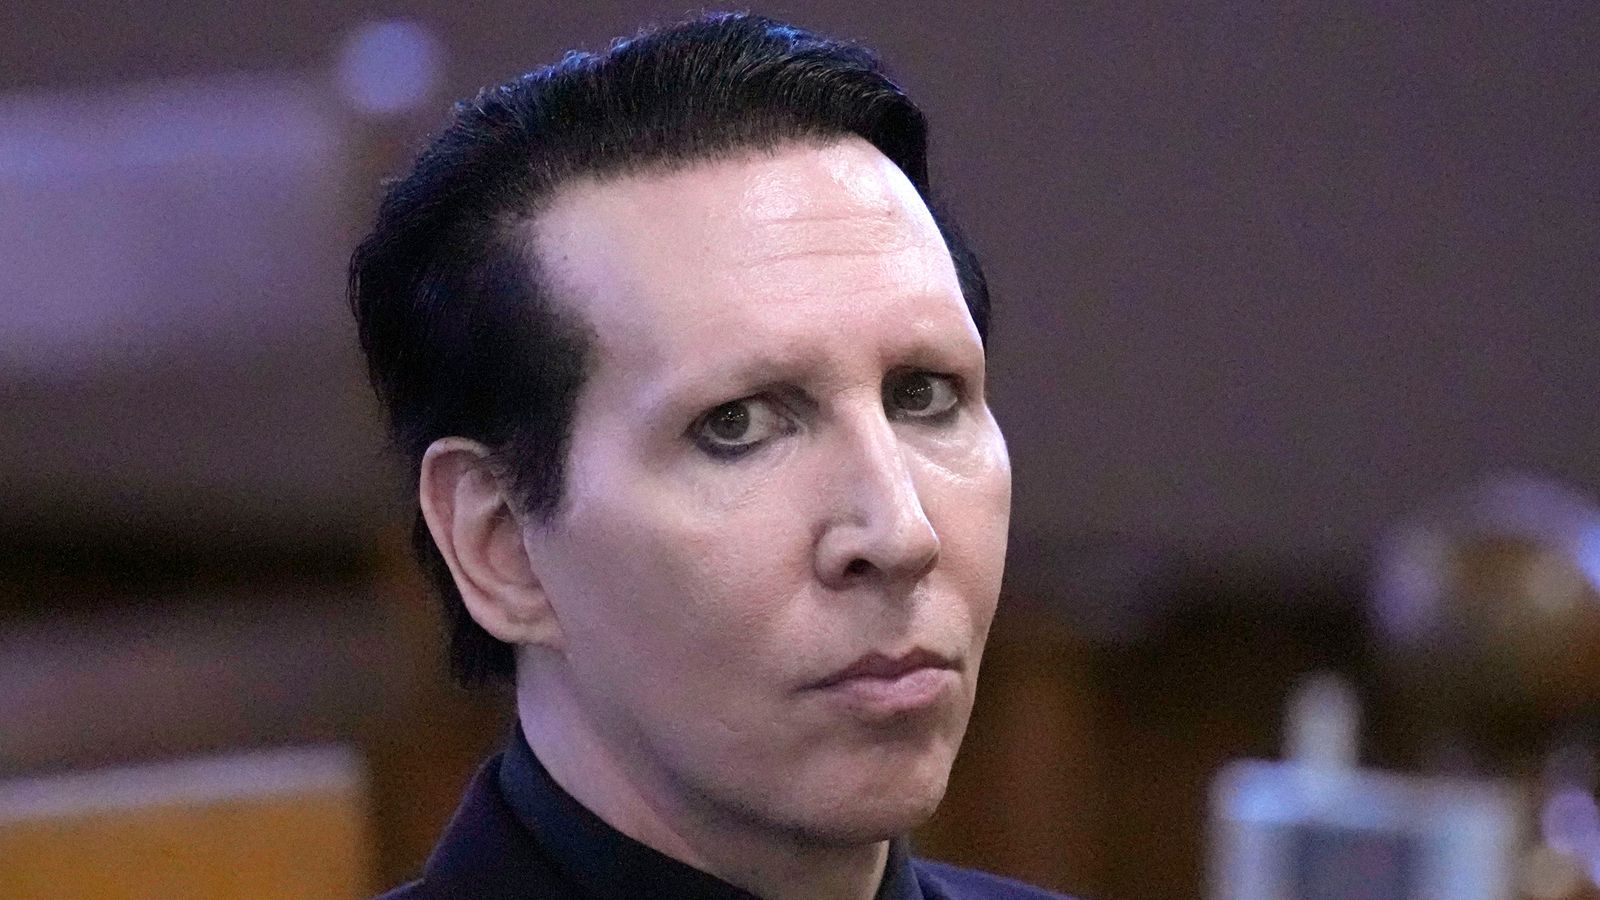 Marilyn Manson: Rock star fined for blowing nose on camera operator in 2019 concert